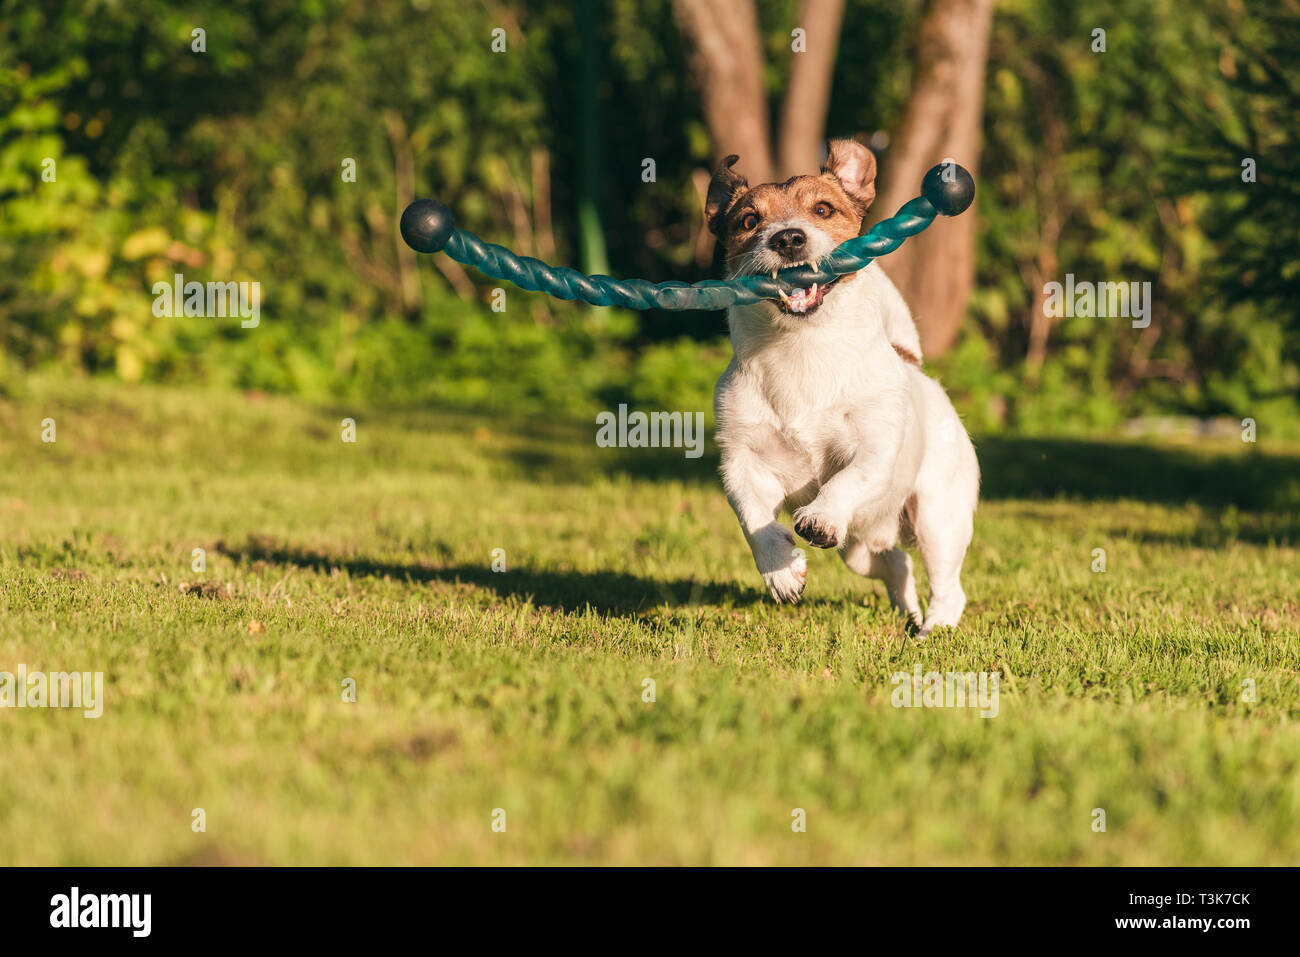 Running dog playing with fetch stick toy at backyard lawn Stock Photo